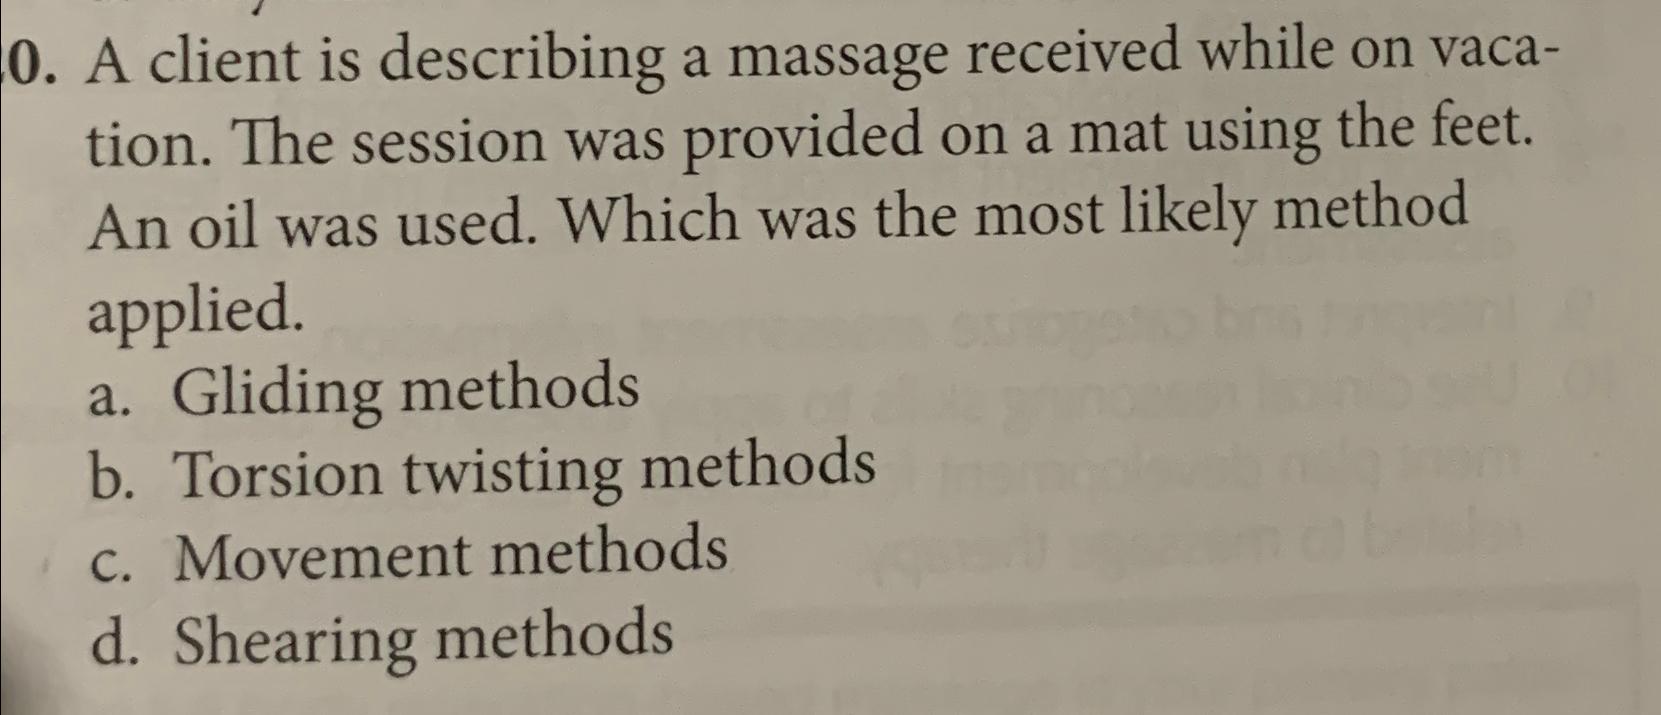 0. A client is describing a massage received while on vaca- tion. The session was provided on a mat using the